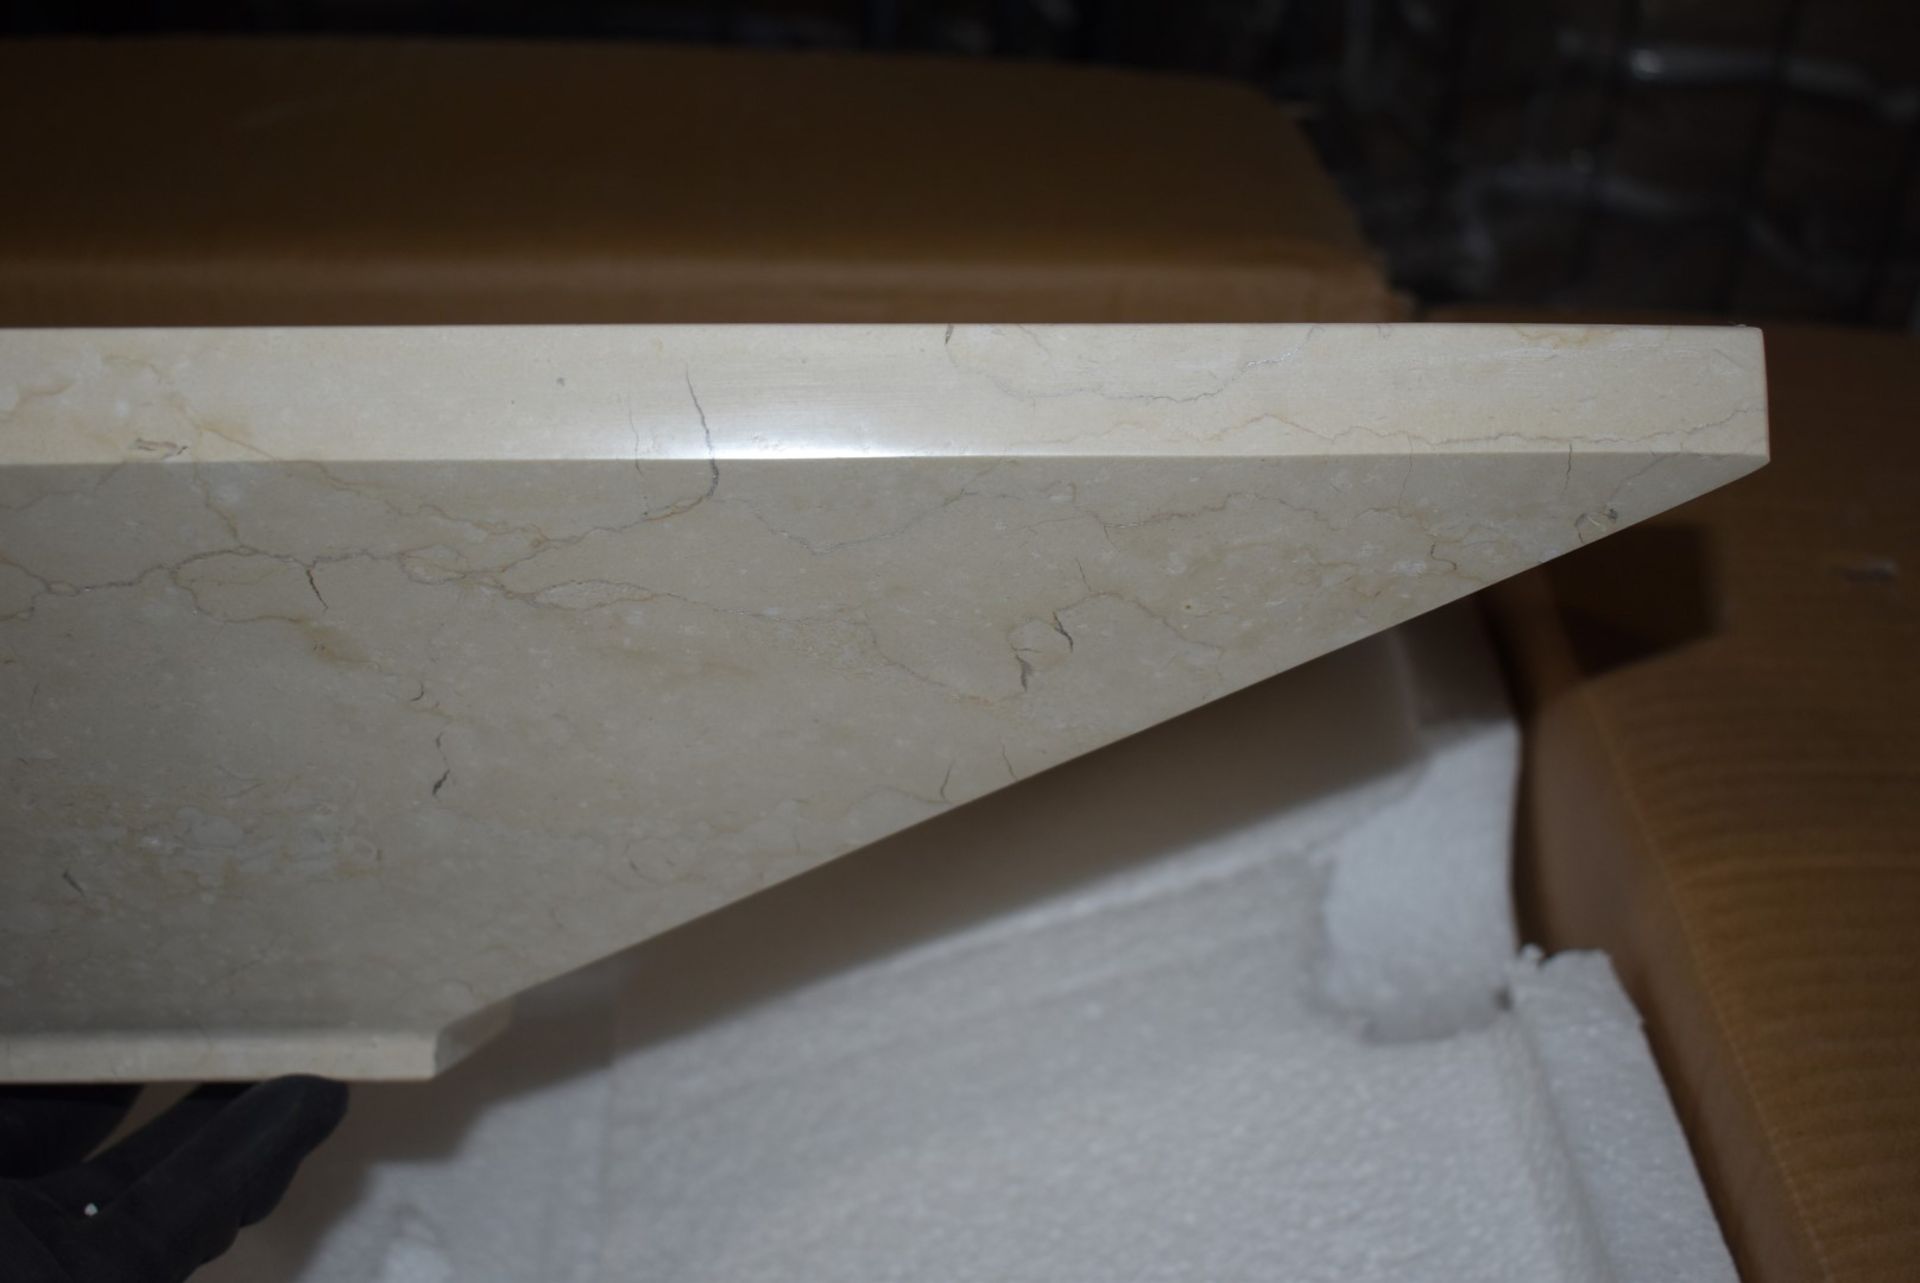 1 x Stonearth 'Karo' Solid Galala Marble Stone Countertop Sink Basin - New Boxed Stock - RRP £ - Image 5 of 8